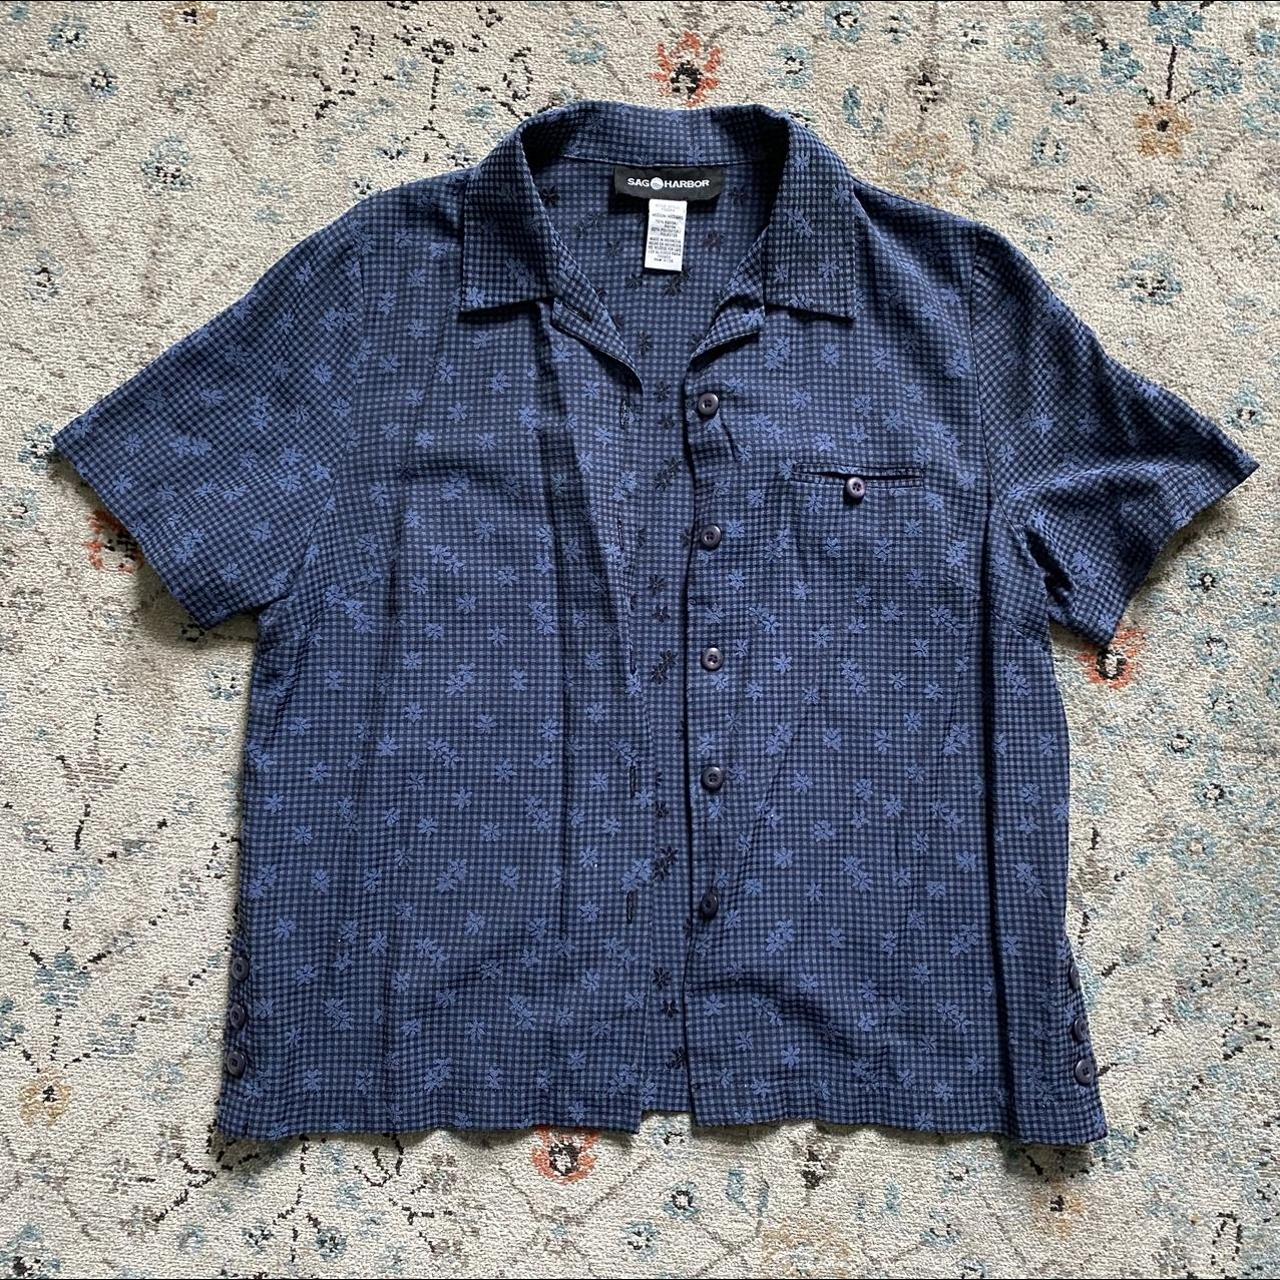 Sag Harbor Women's Blue and Navy Blouse